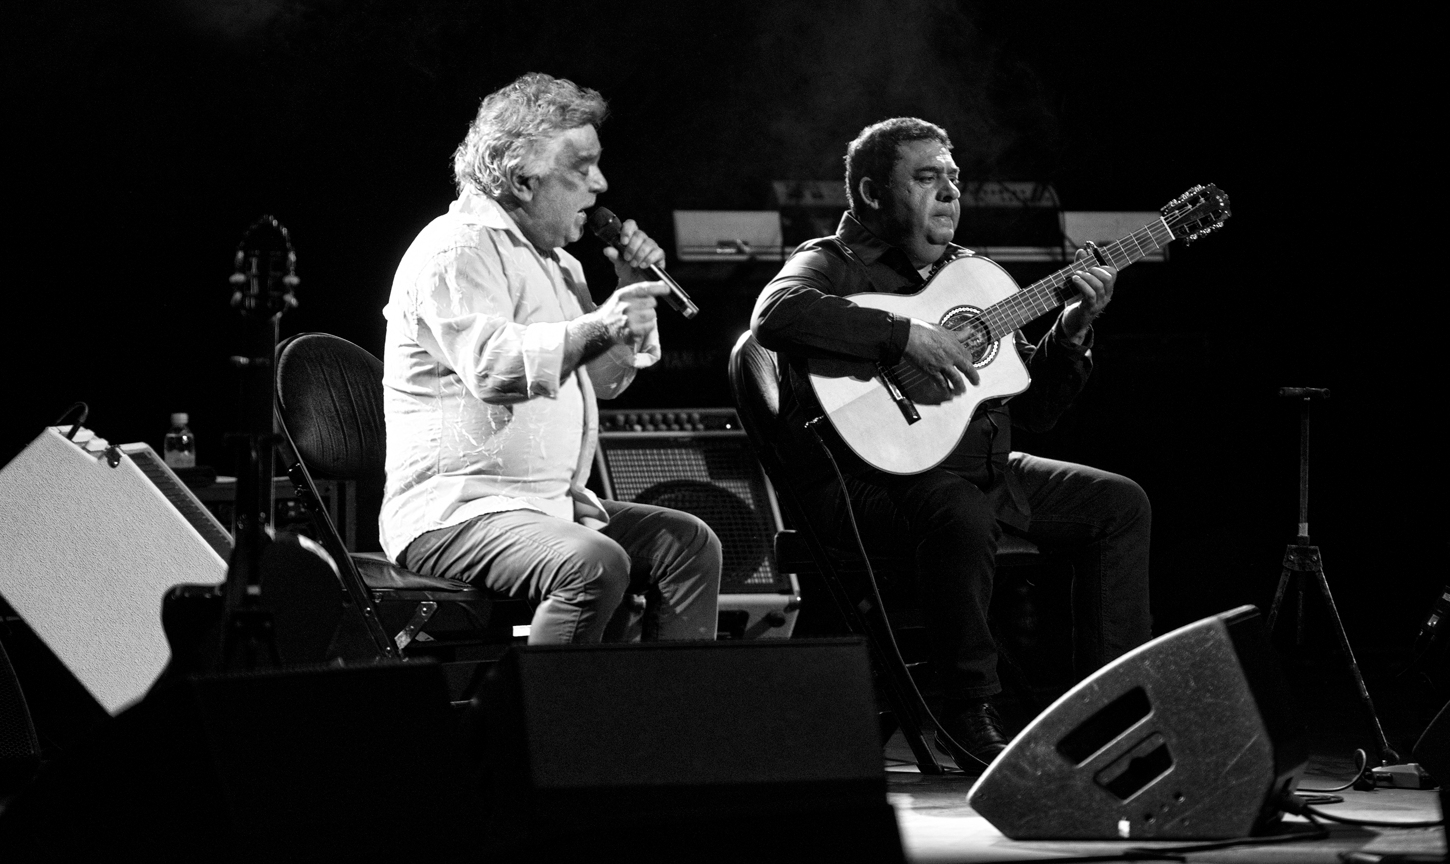 About Gipsy Kings